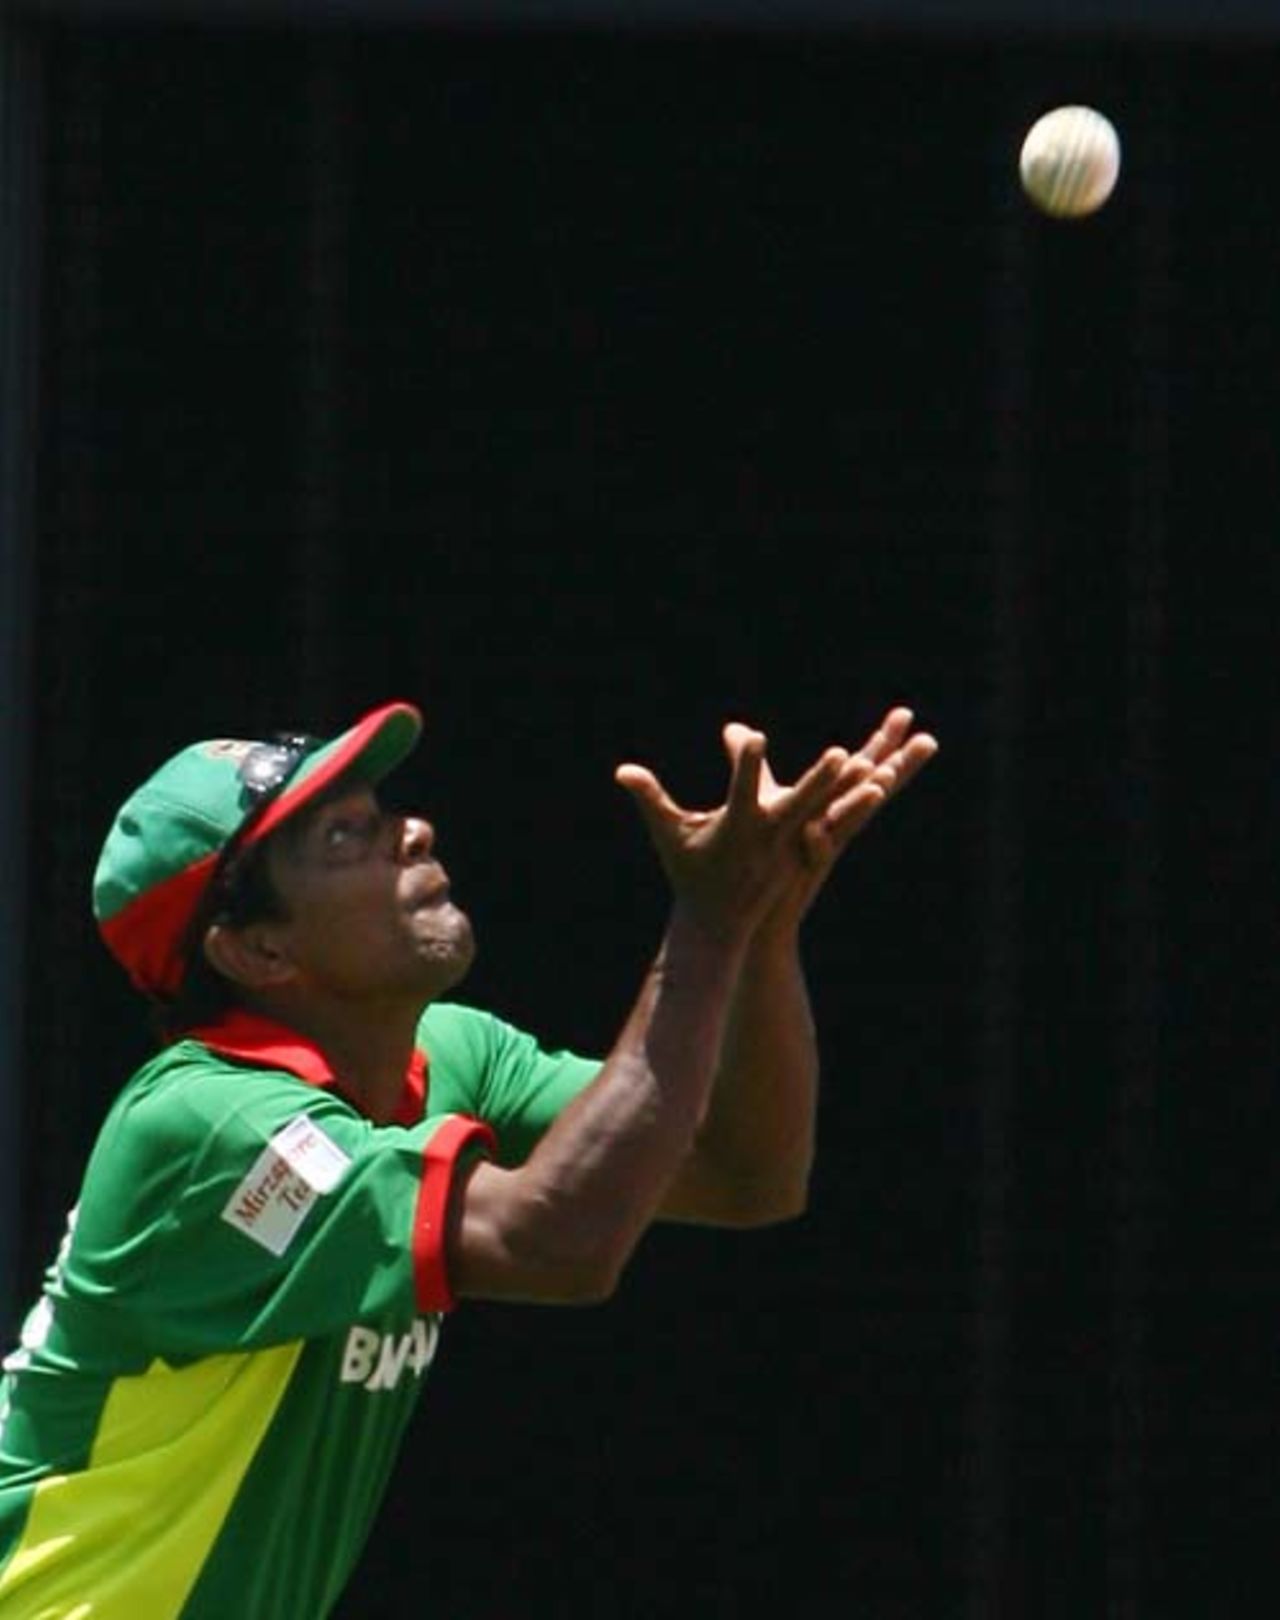 Mohammad Rafique gets in position to take the catch to dismiss William Porterfield, Bangladesh v Ireland, Super Eights, Barbados, April 15, 2007